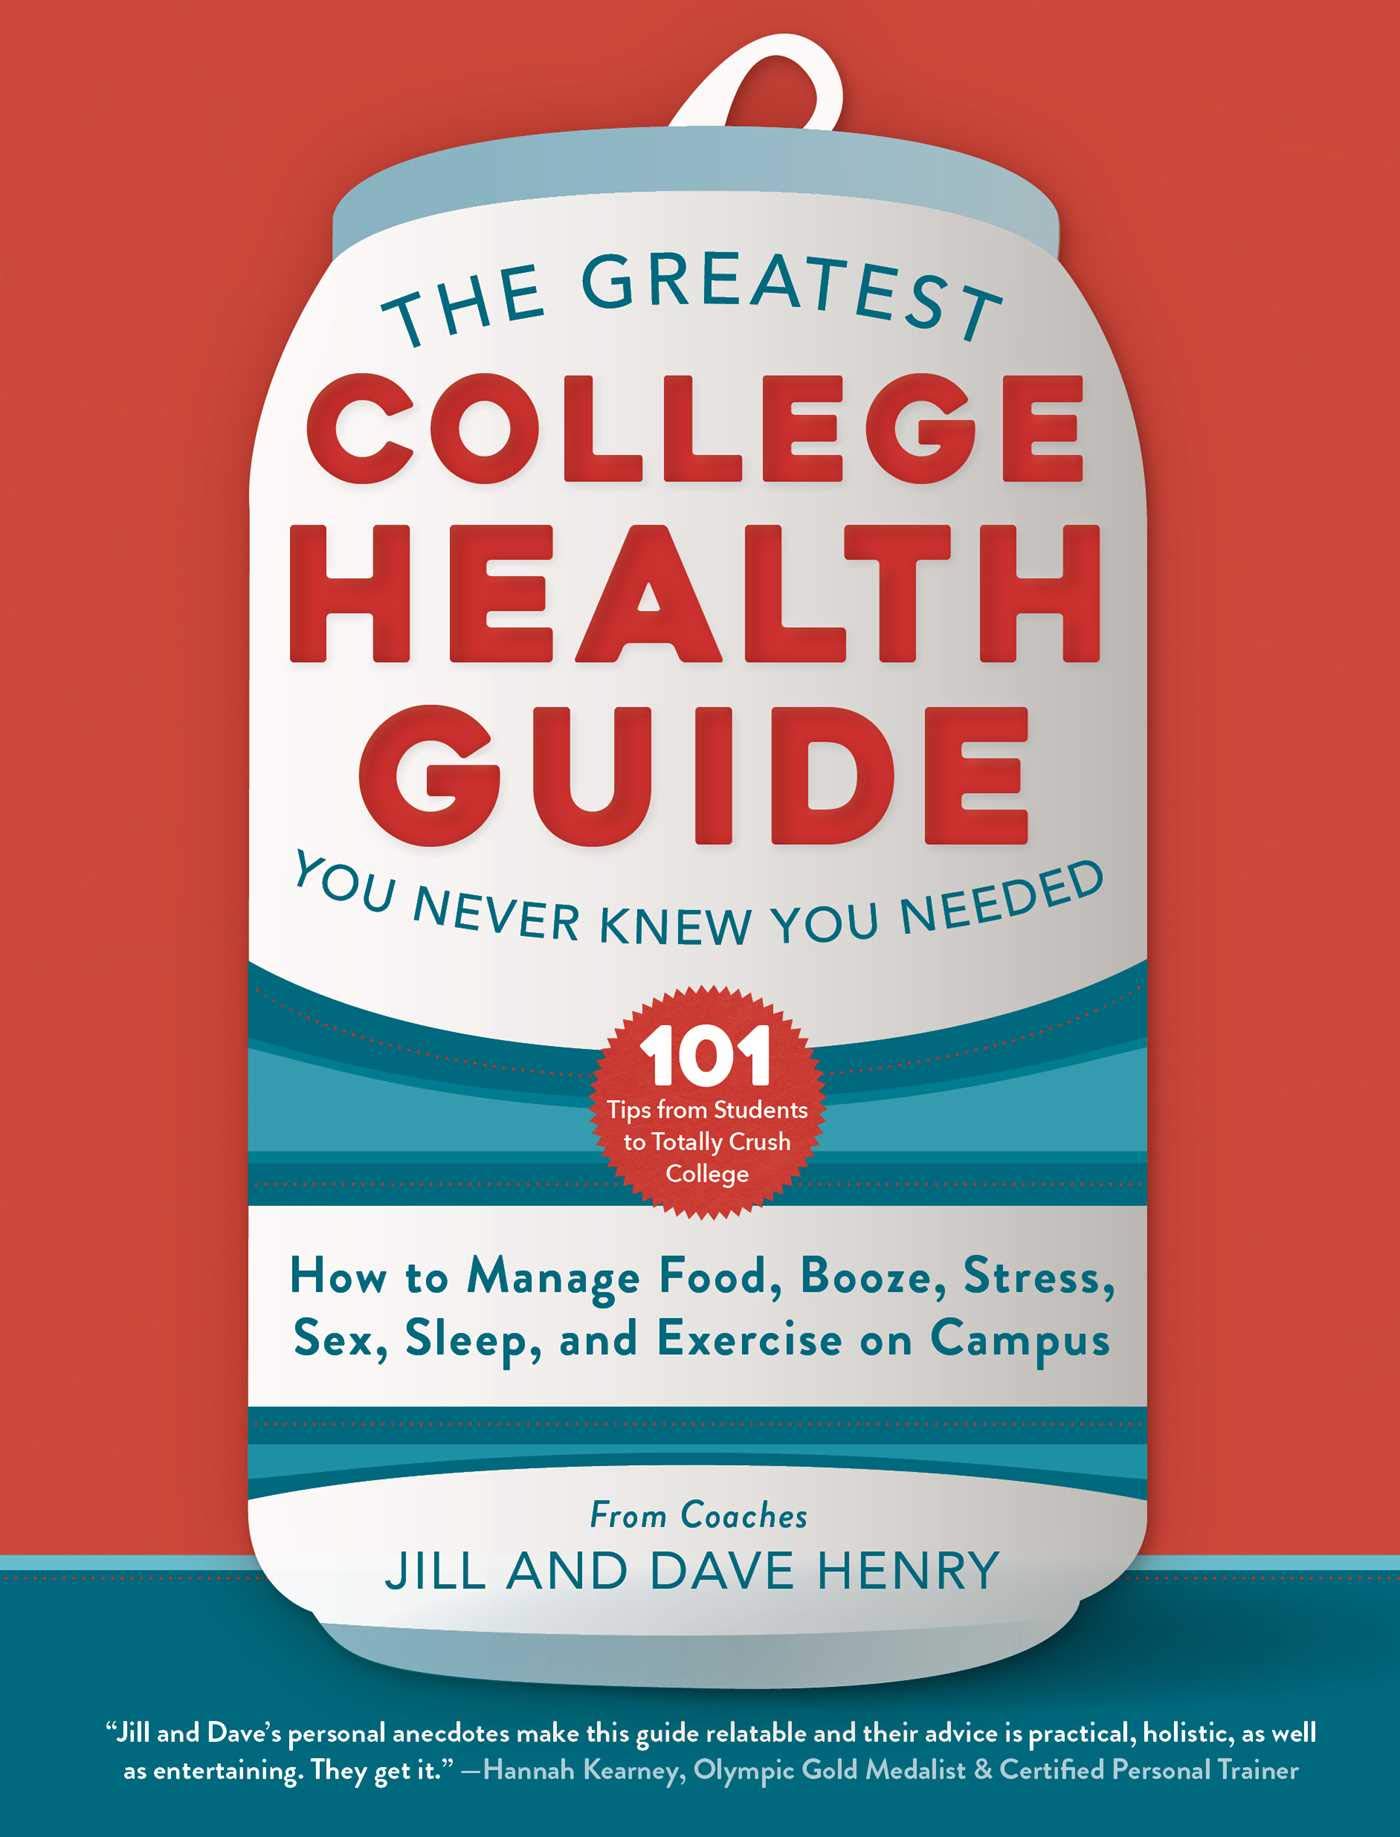 The Greatest College Health Guide You Never Knew You Needed How to Manage Food, Booze, Stress, Sex, Sleep and Exercise on Campus